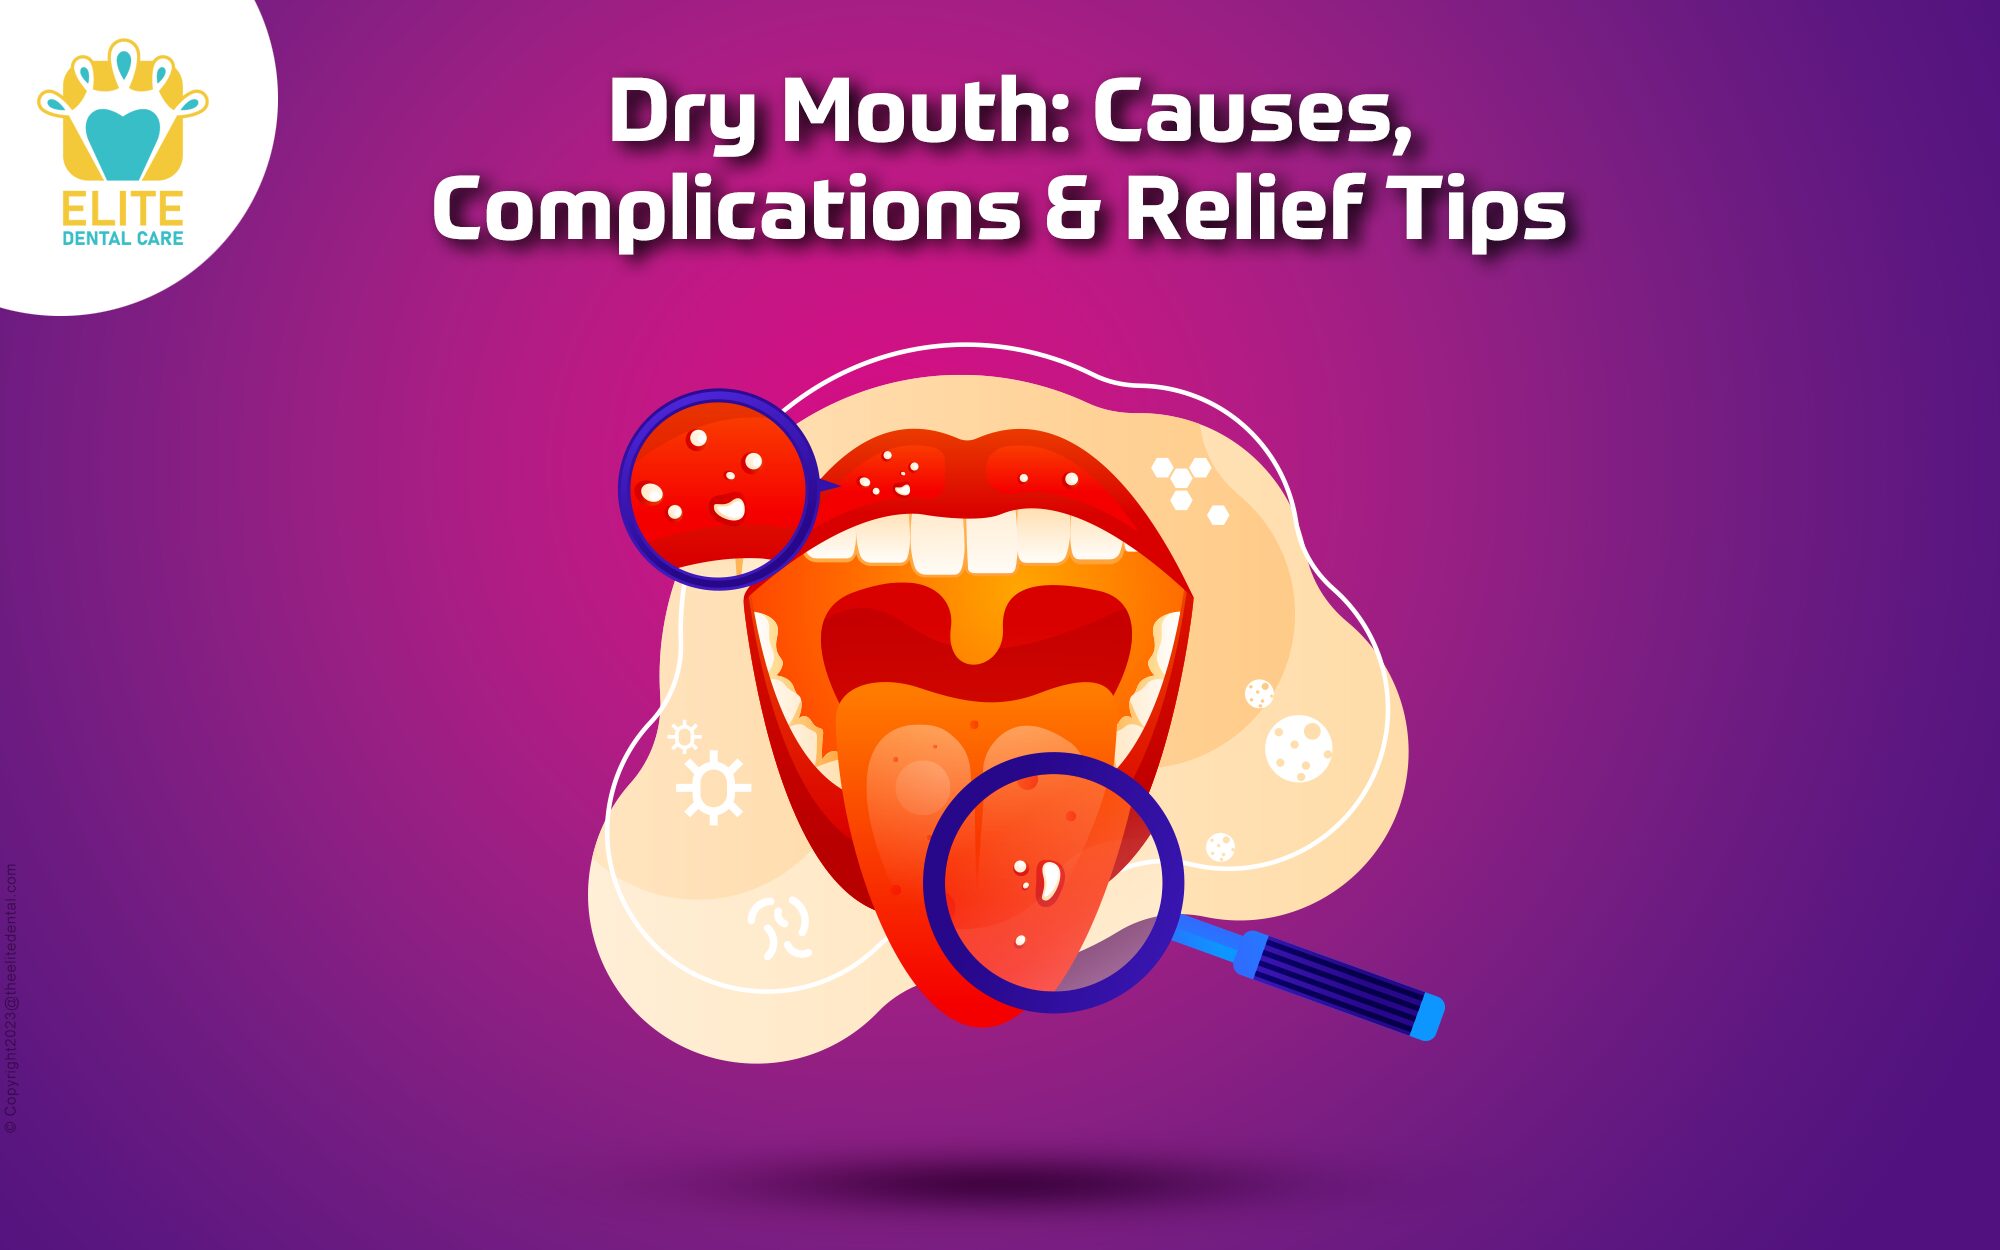 DRY MOUTH: CAUSES, COMPLICATIONS & RELIEF TIPS